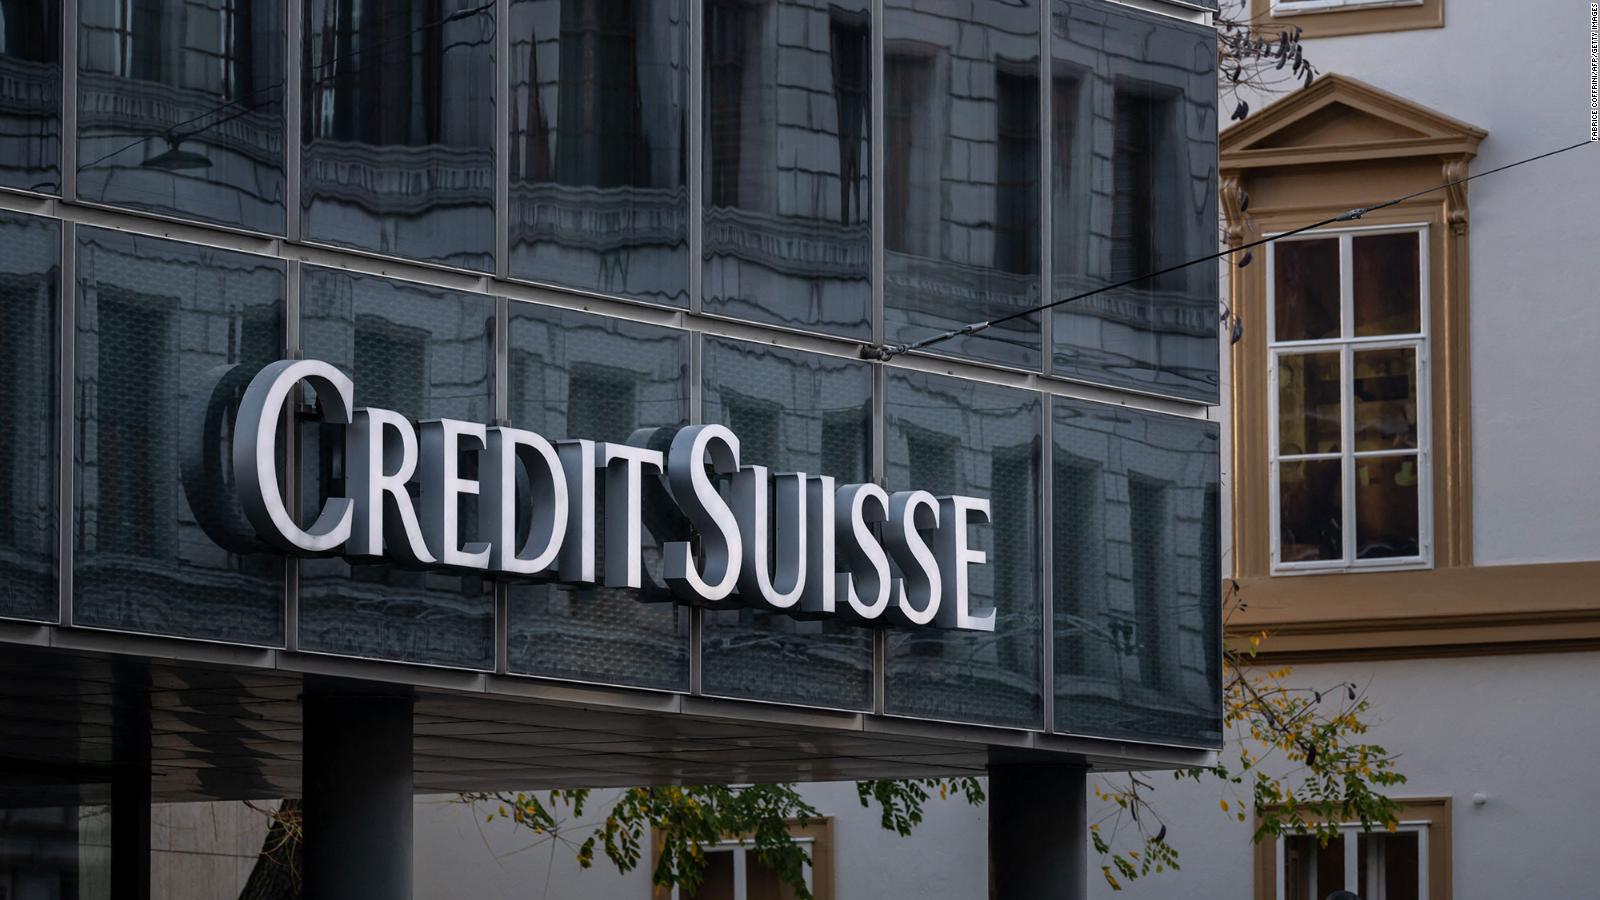 Credit Suisse shares fell after the Saudi investor ruled out injecting more funds